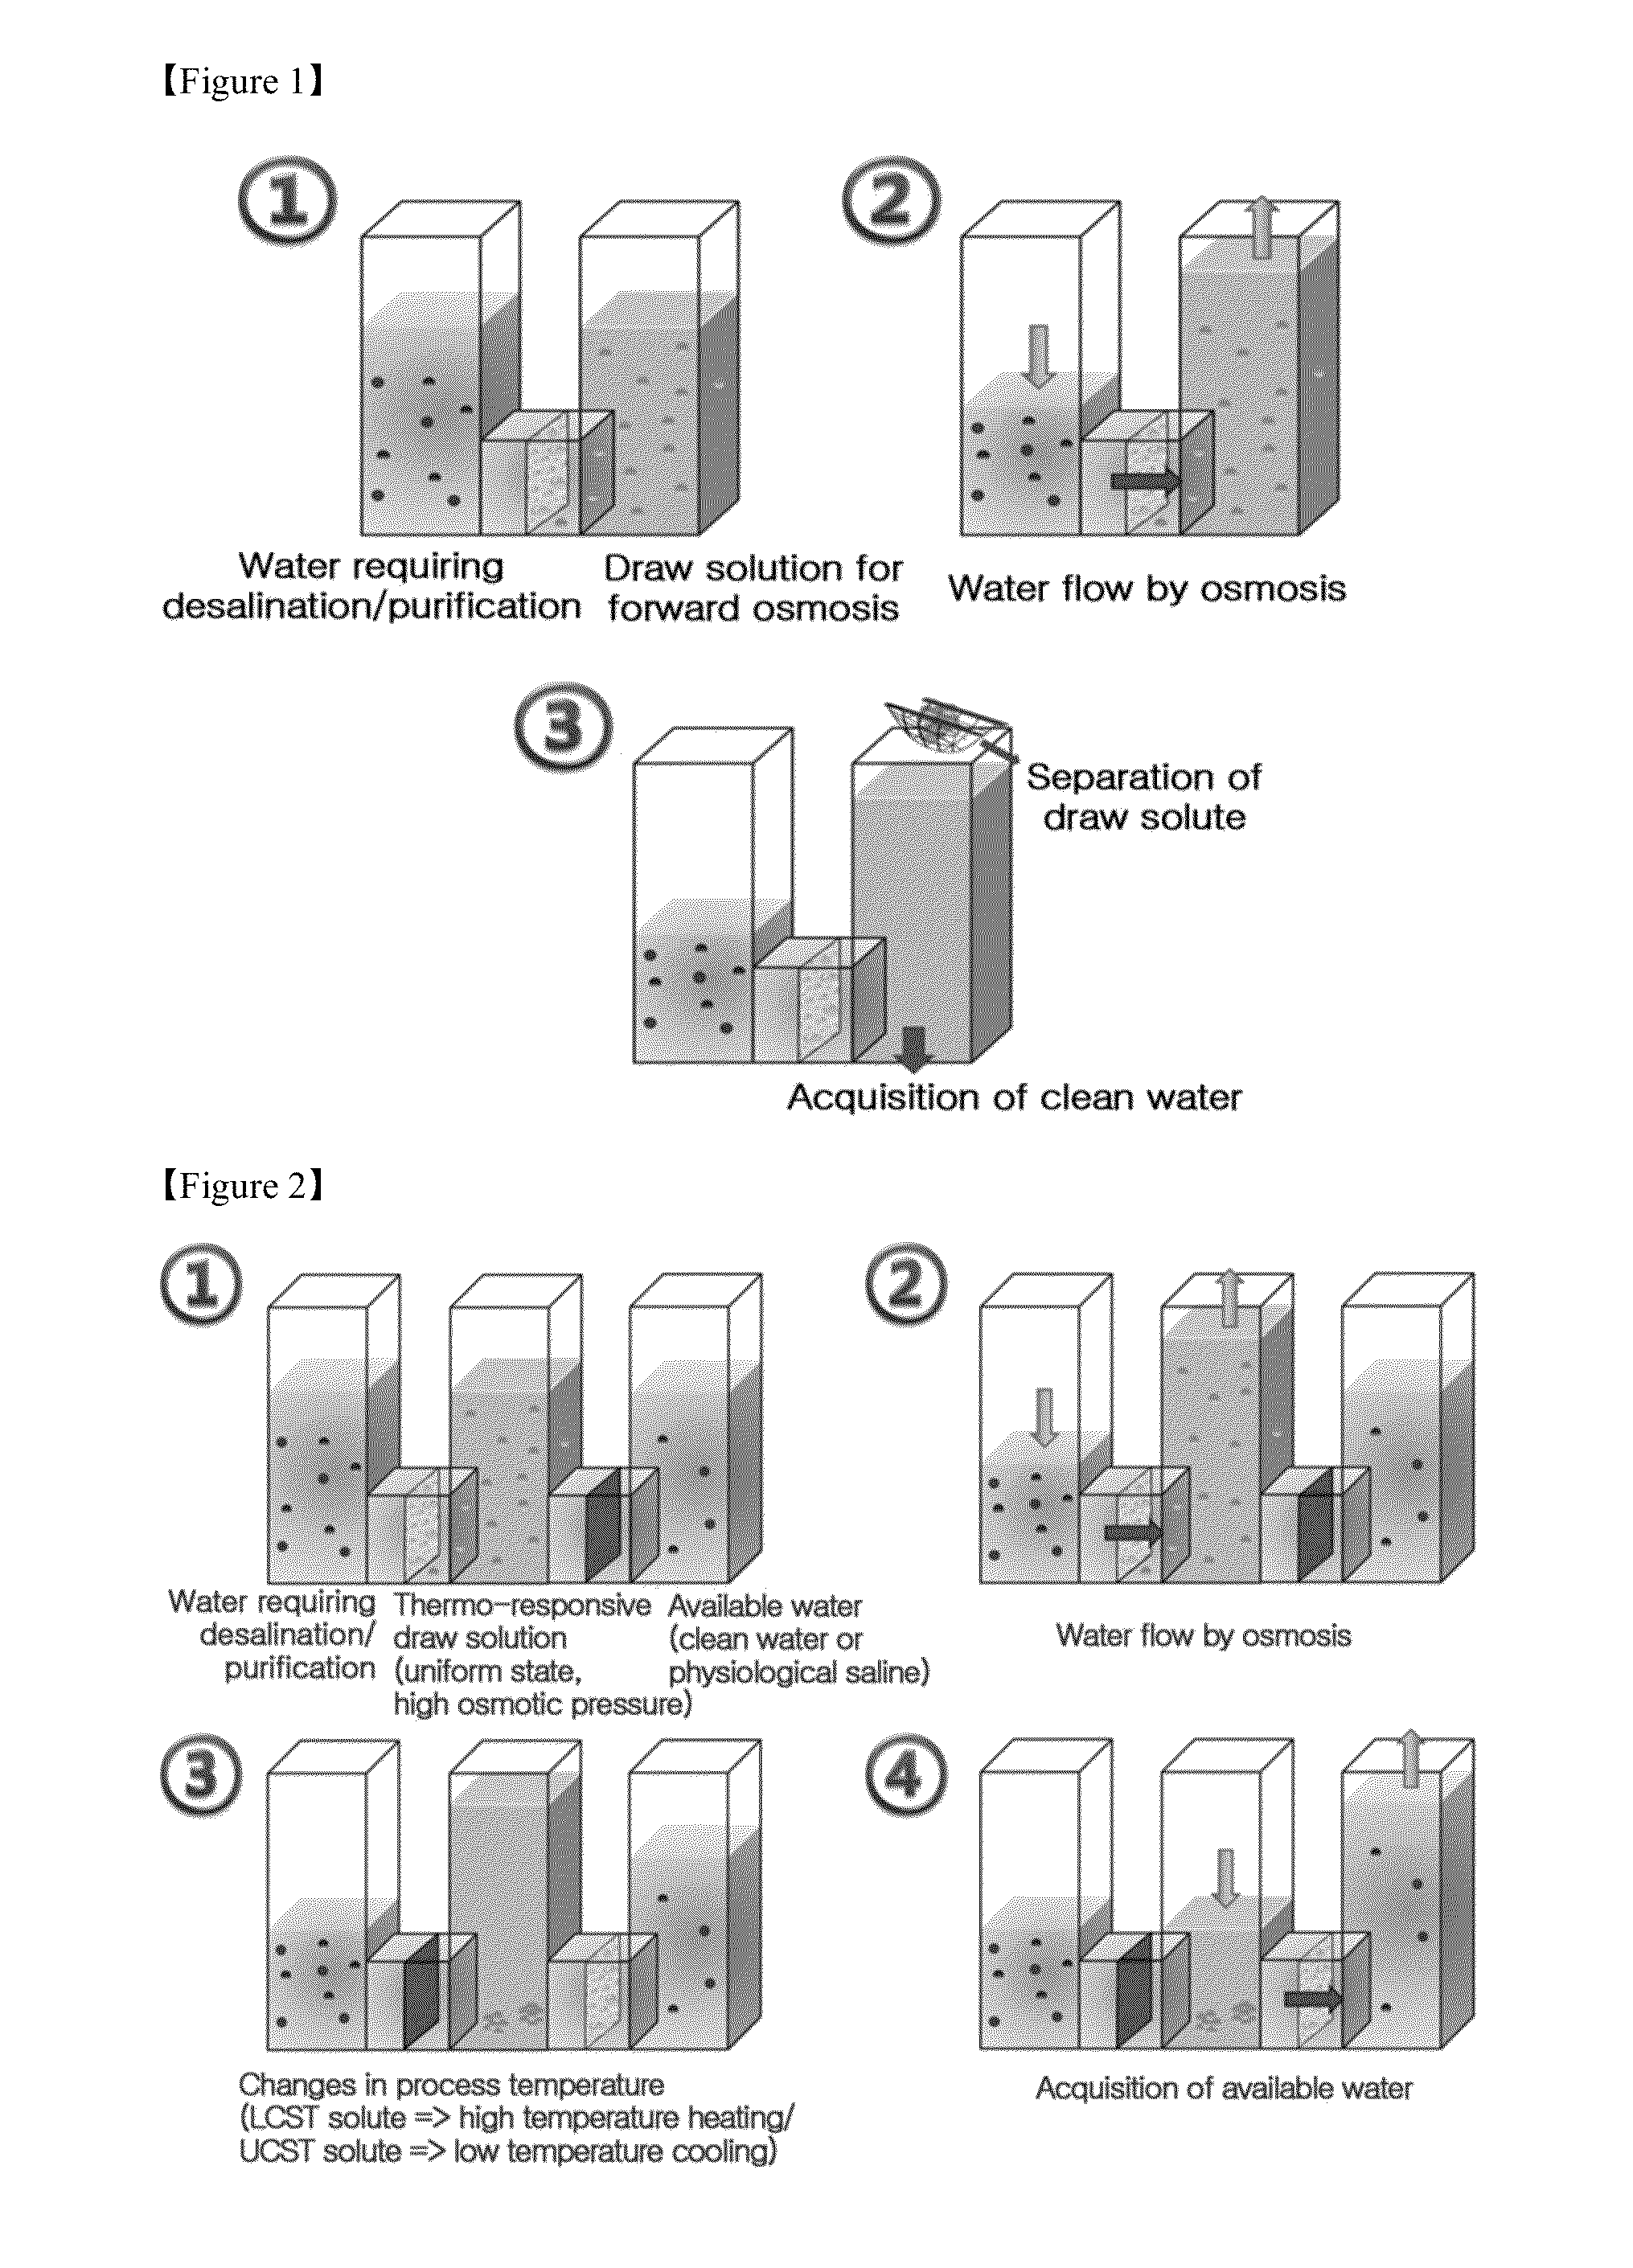 Thermo-responsive draw solute for forward osmosis and method for water desalination and purification using the same